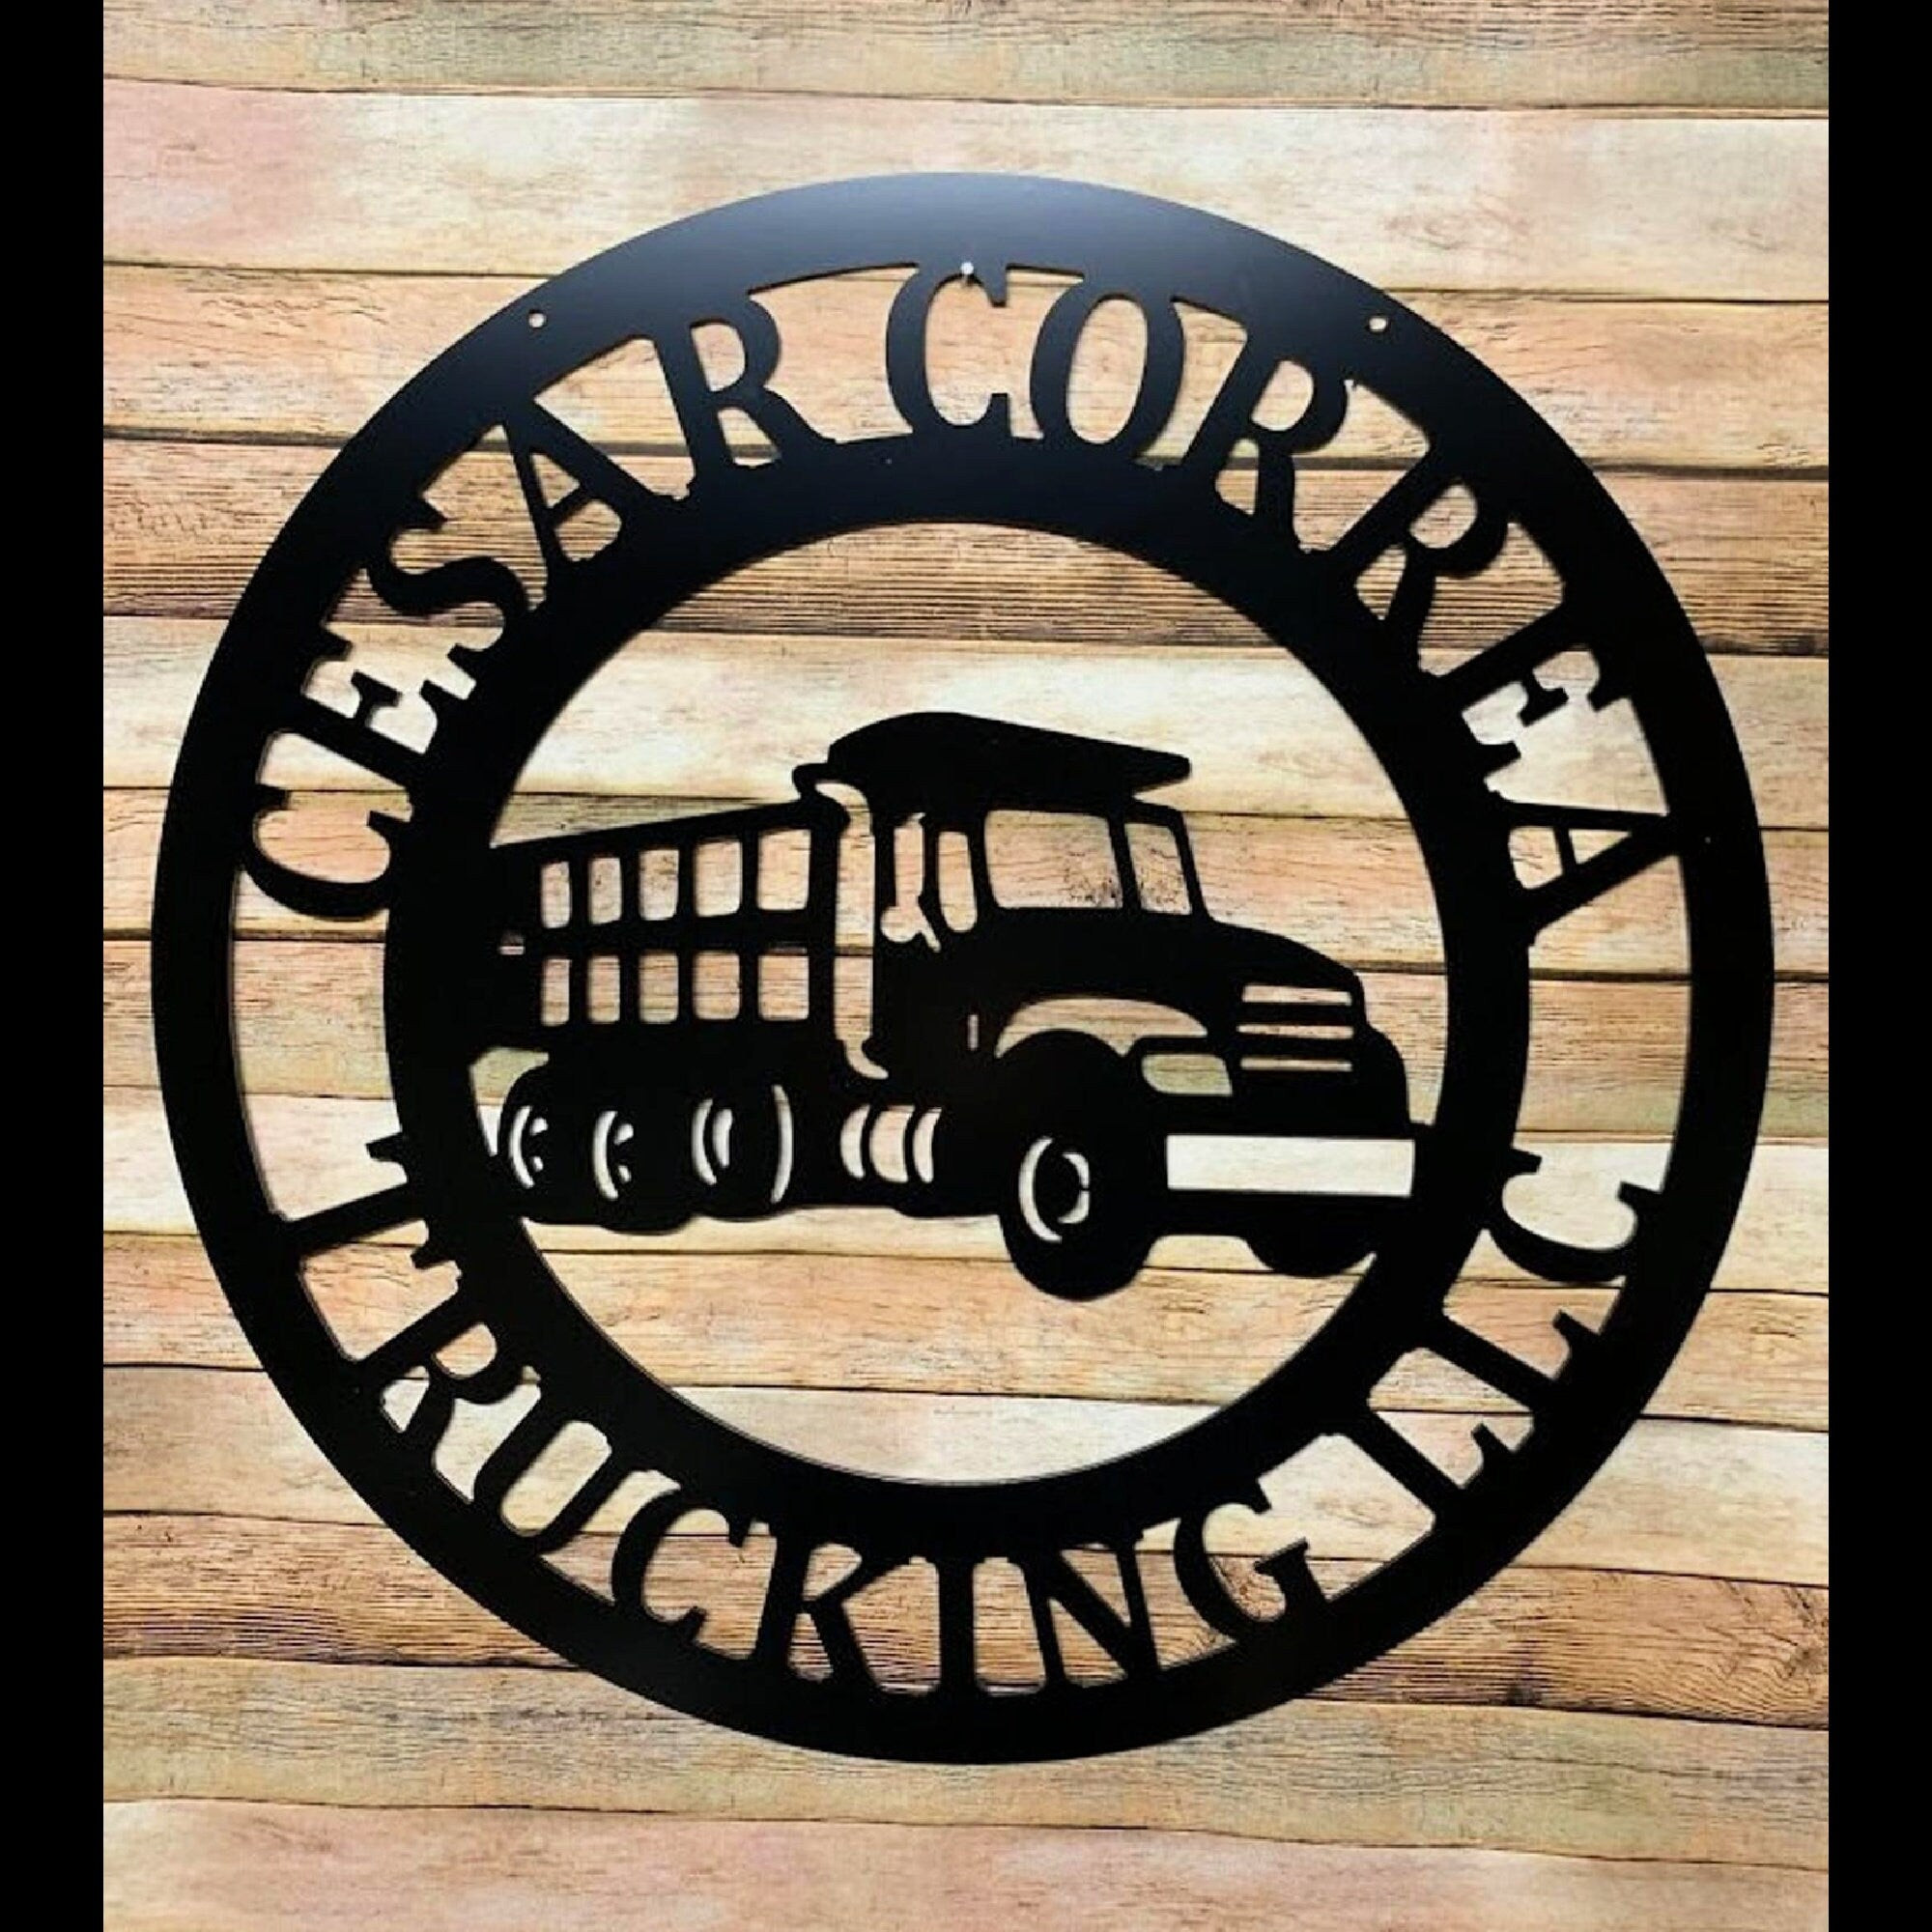 Excavation Contractor Decor, Personalized Dump Truck Business Sign, Custom Trucking Company Door, Wall Hanger Gift, Construction Gifts Laser Cut Metal Signs Custom Gift Ideas 12x12IN